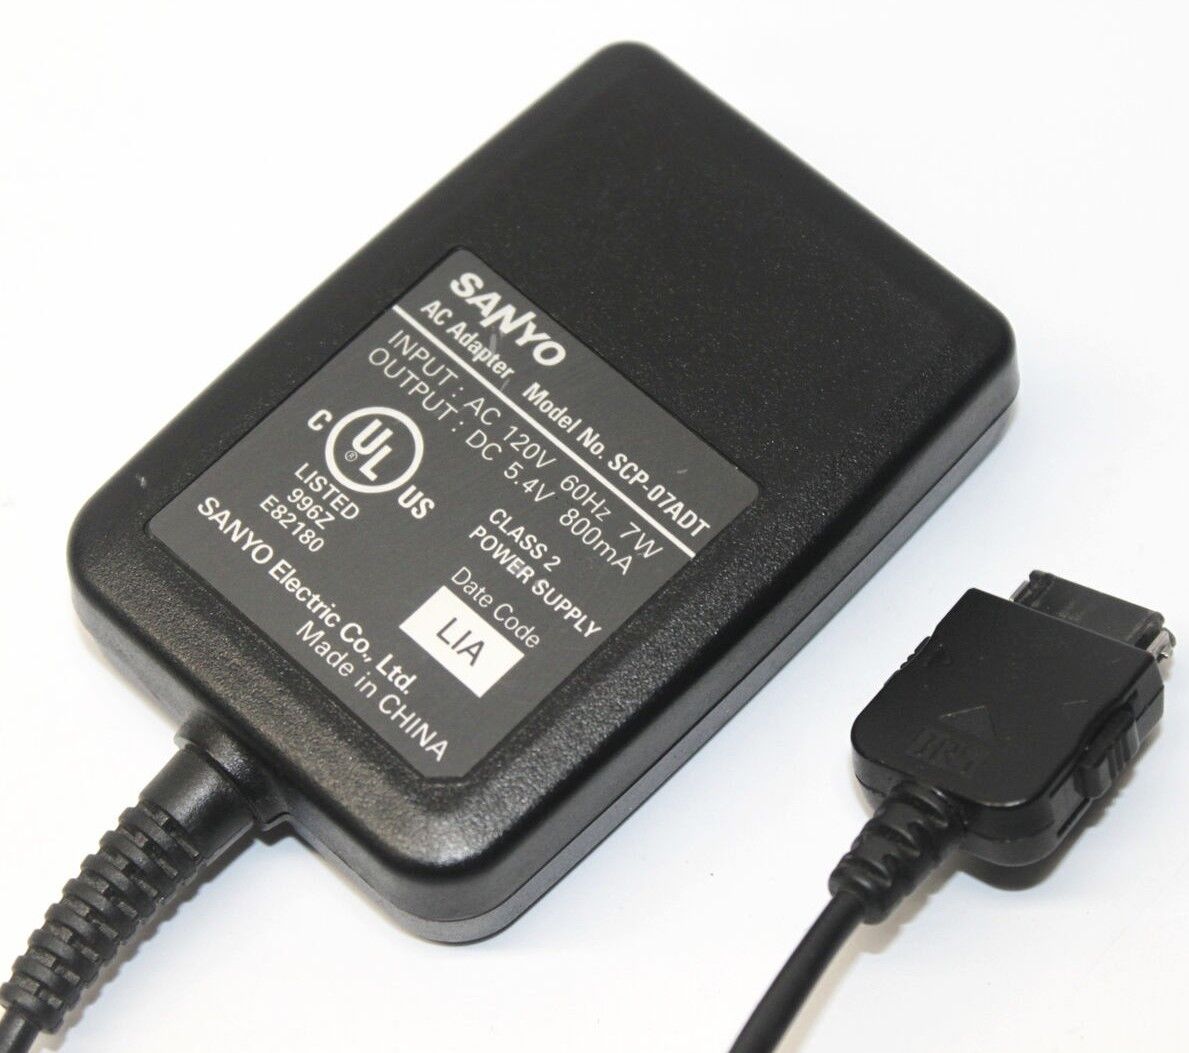 Sanyo SCP-07ADT Class 2 Power Supply AC Adapter Output DC 5.4V 800mA Brand: Sanyo Type: Adapter MPN: SCP-07ADT - Click Image to Close